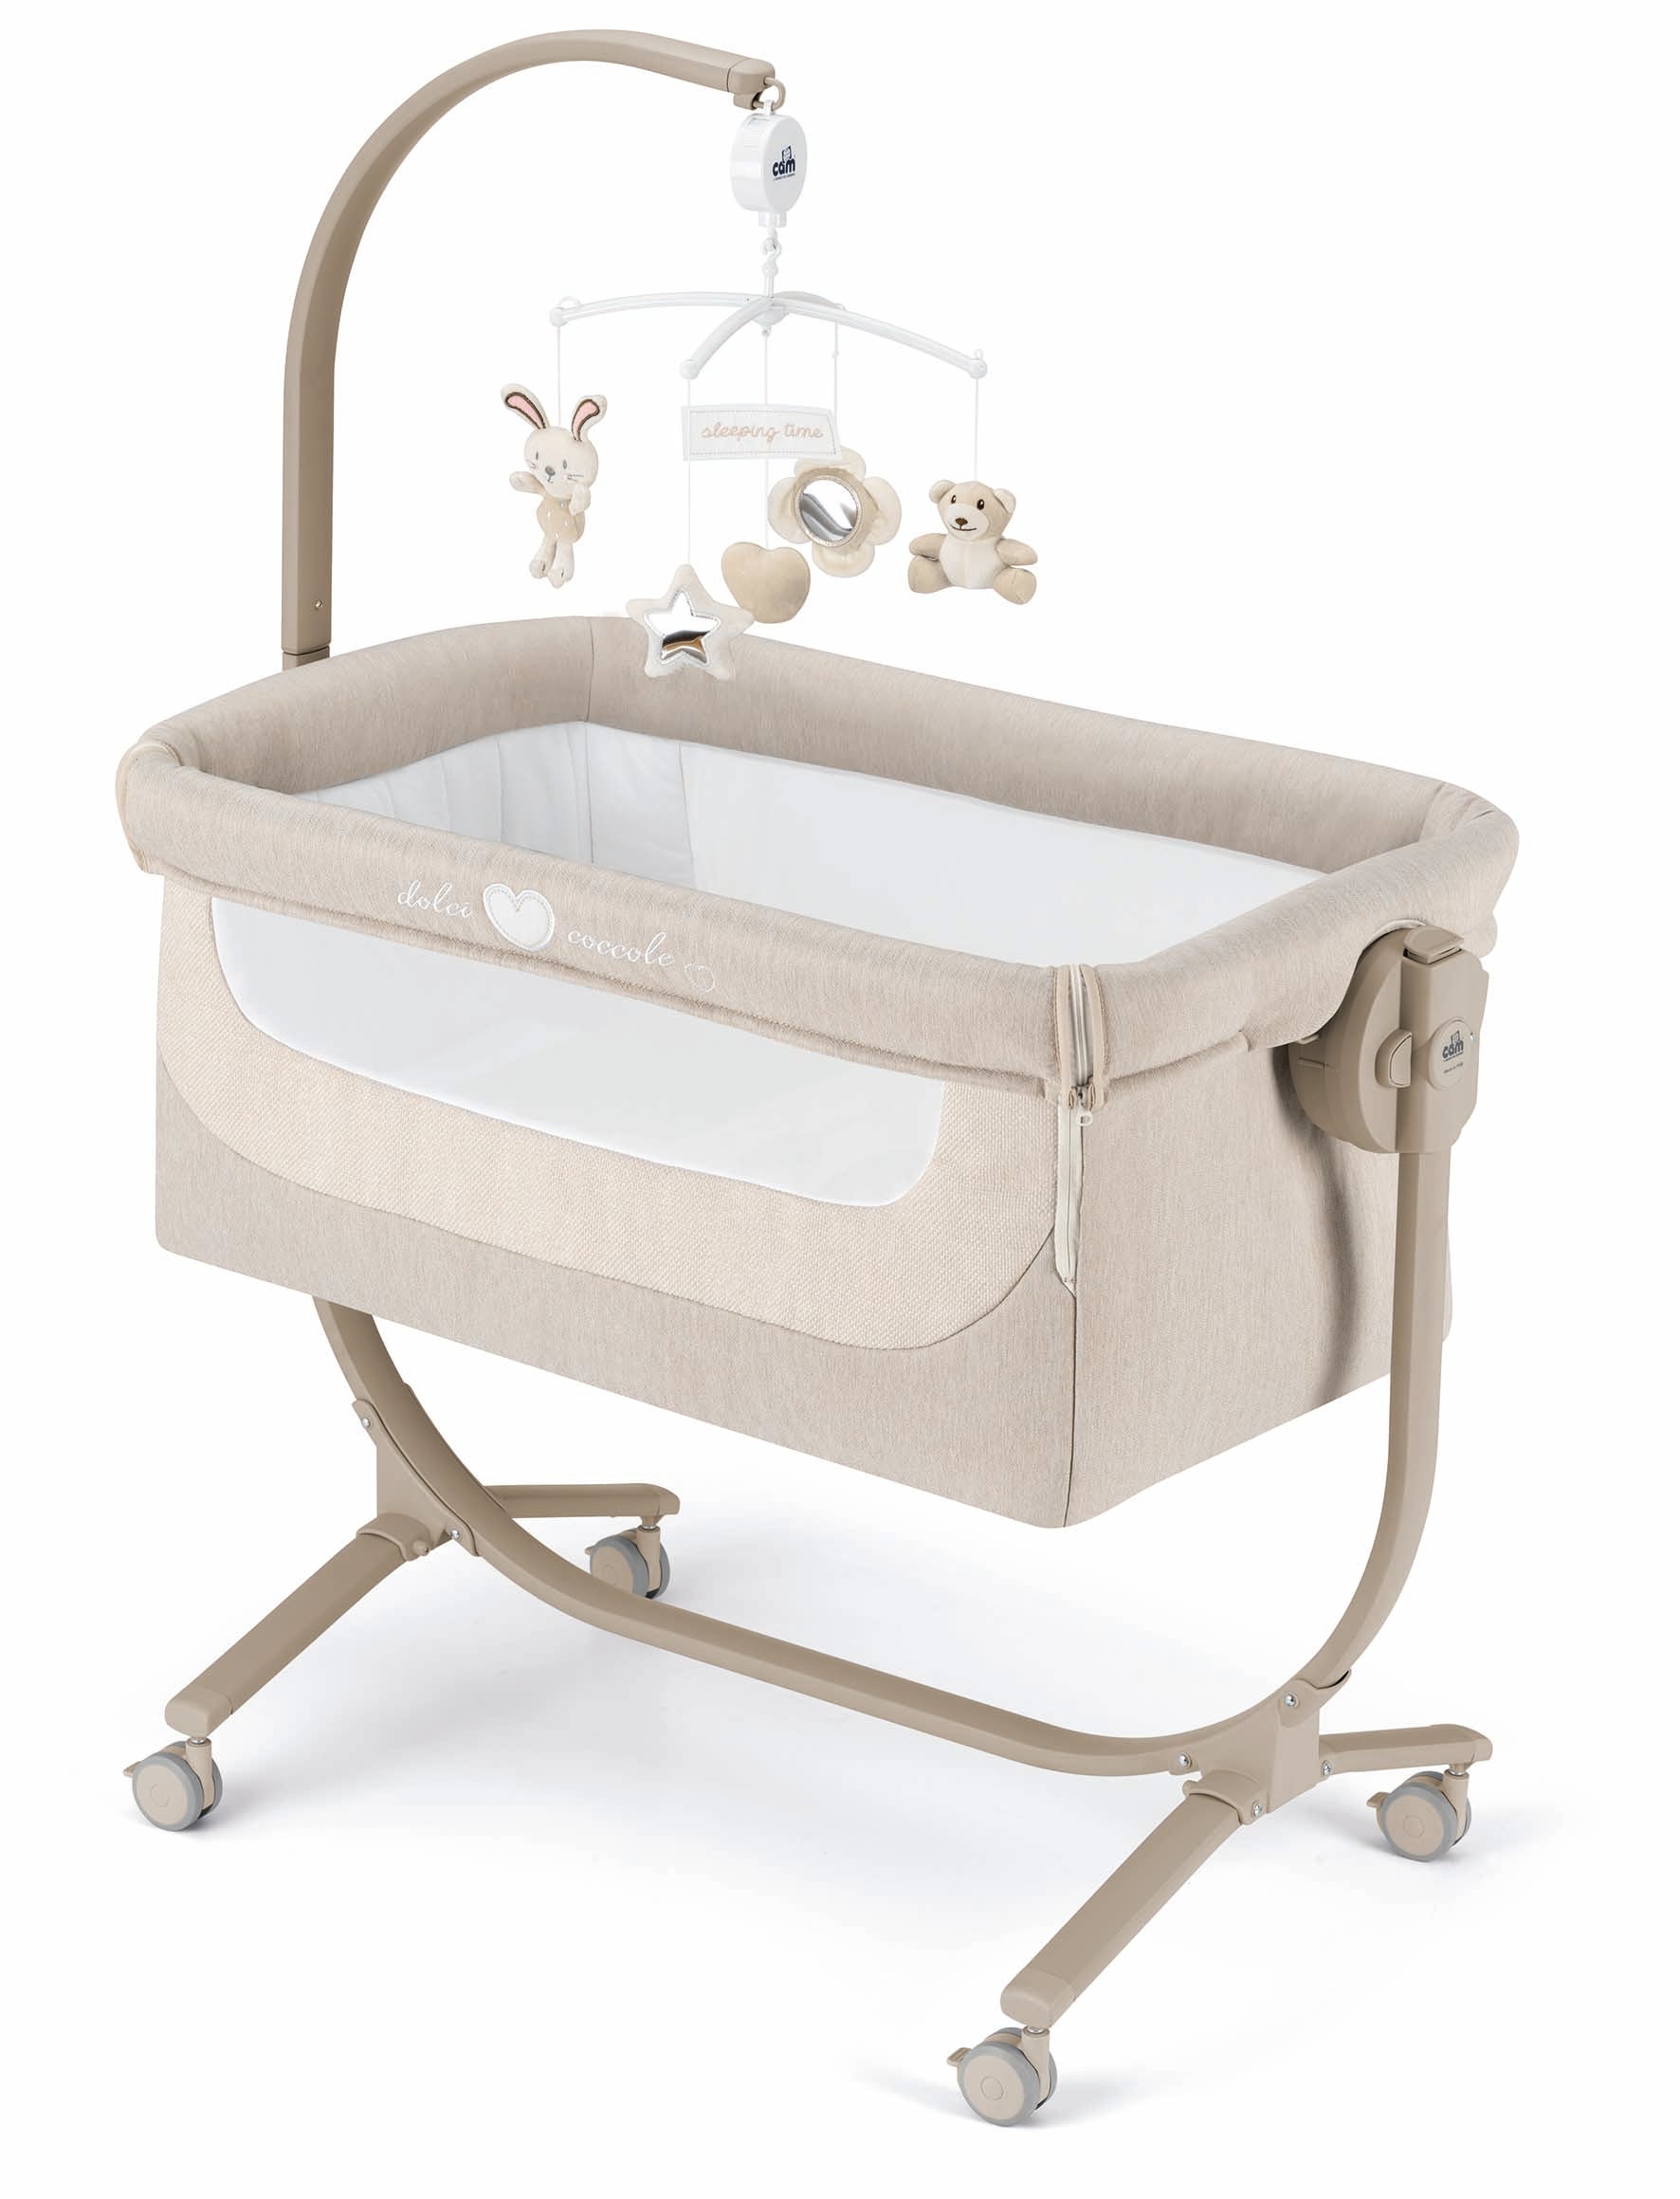 Cullami Co-Sleeper Crib Cot in brown cream - Safe and Comfortable Sleeping Space for Your Little One and available in South Africa